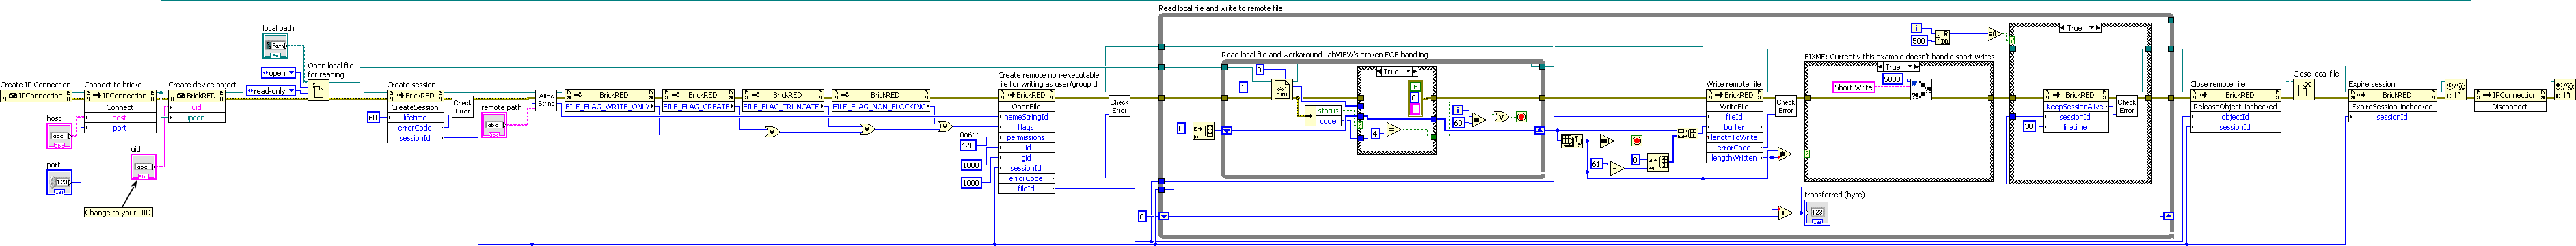 LabVIEW Write File Example